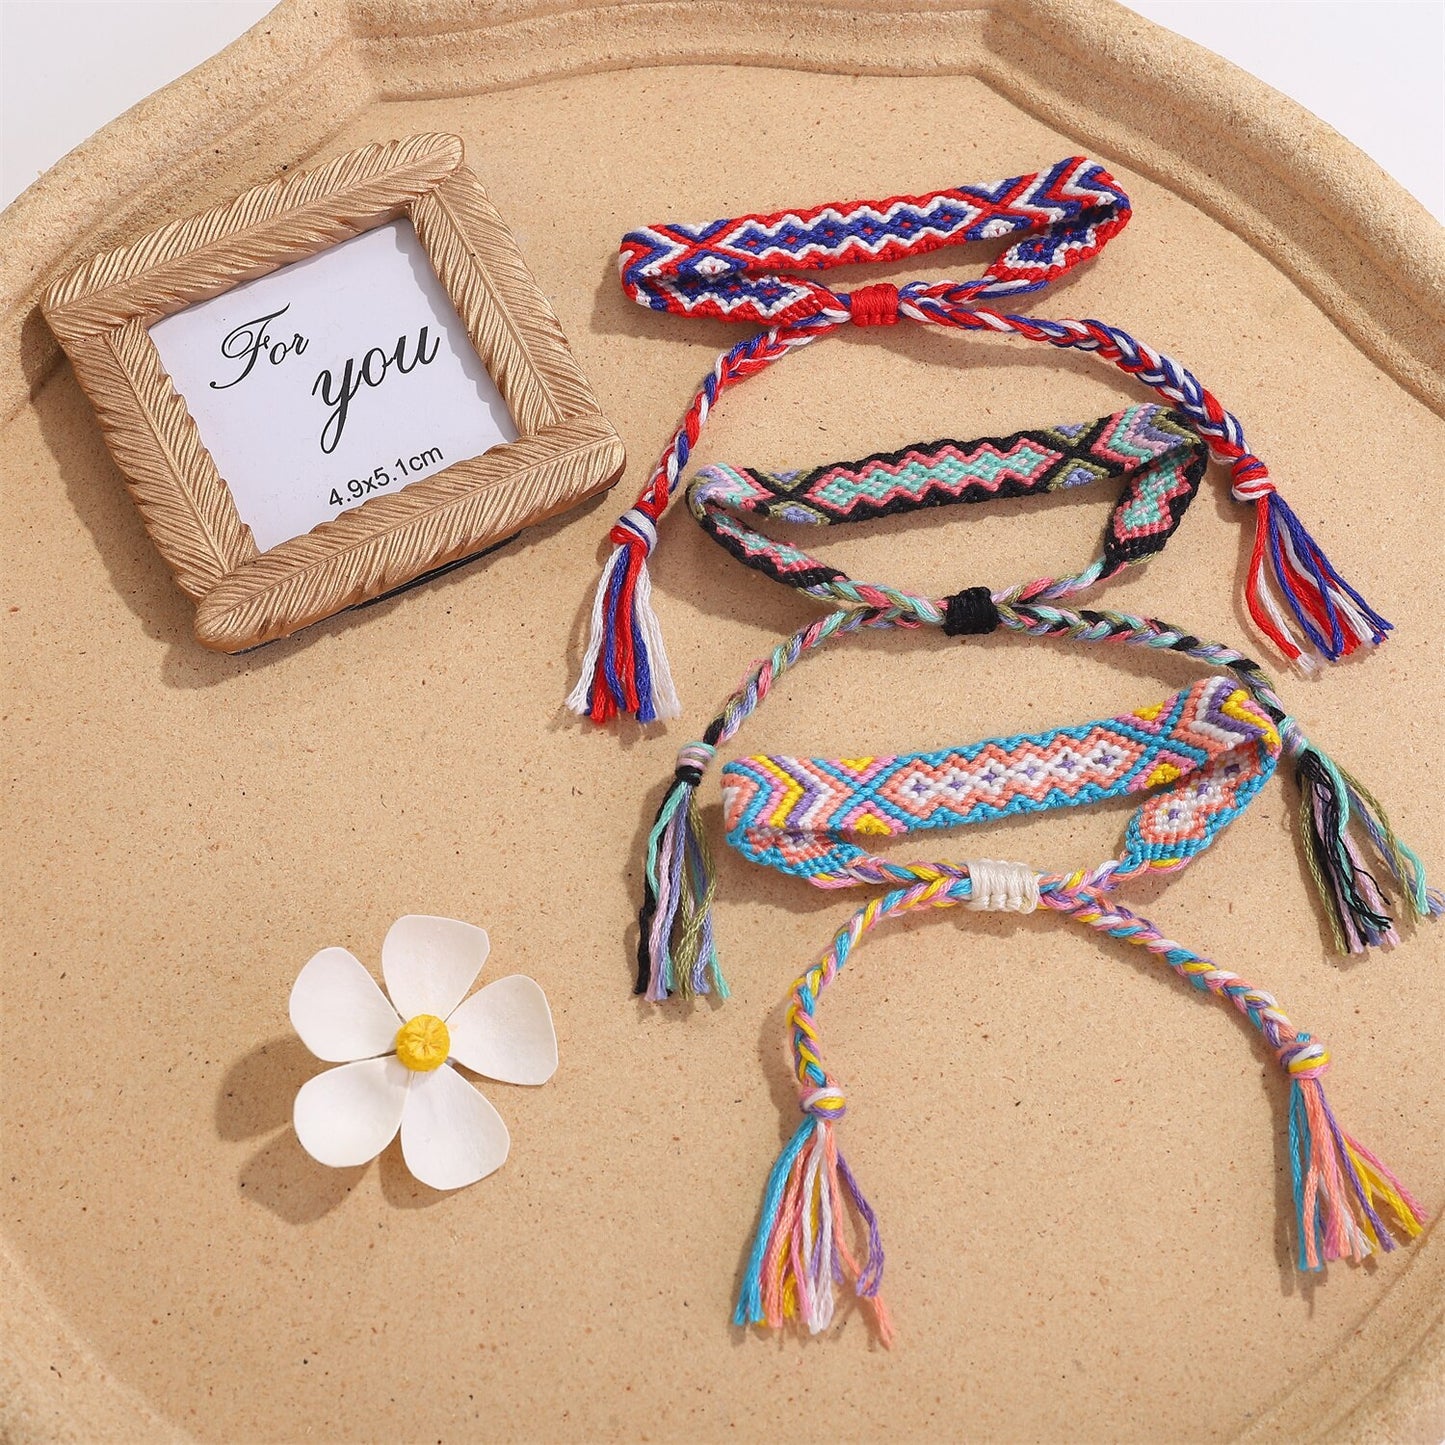 12pcs/lot Bohemia Braided Rope Bracelet Completely Handmade Embroidery Bracelet for Women Wide Cuff Waterproof Anklets Jewelry